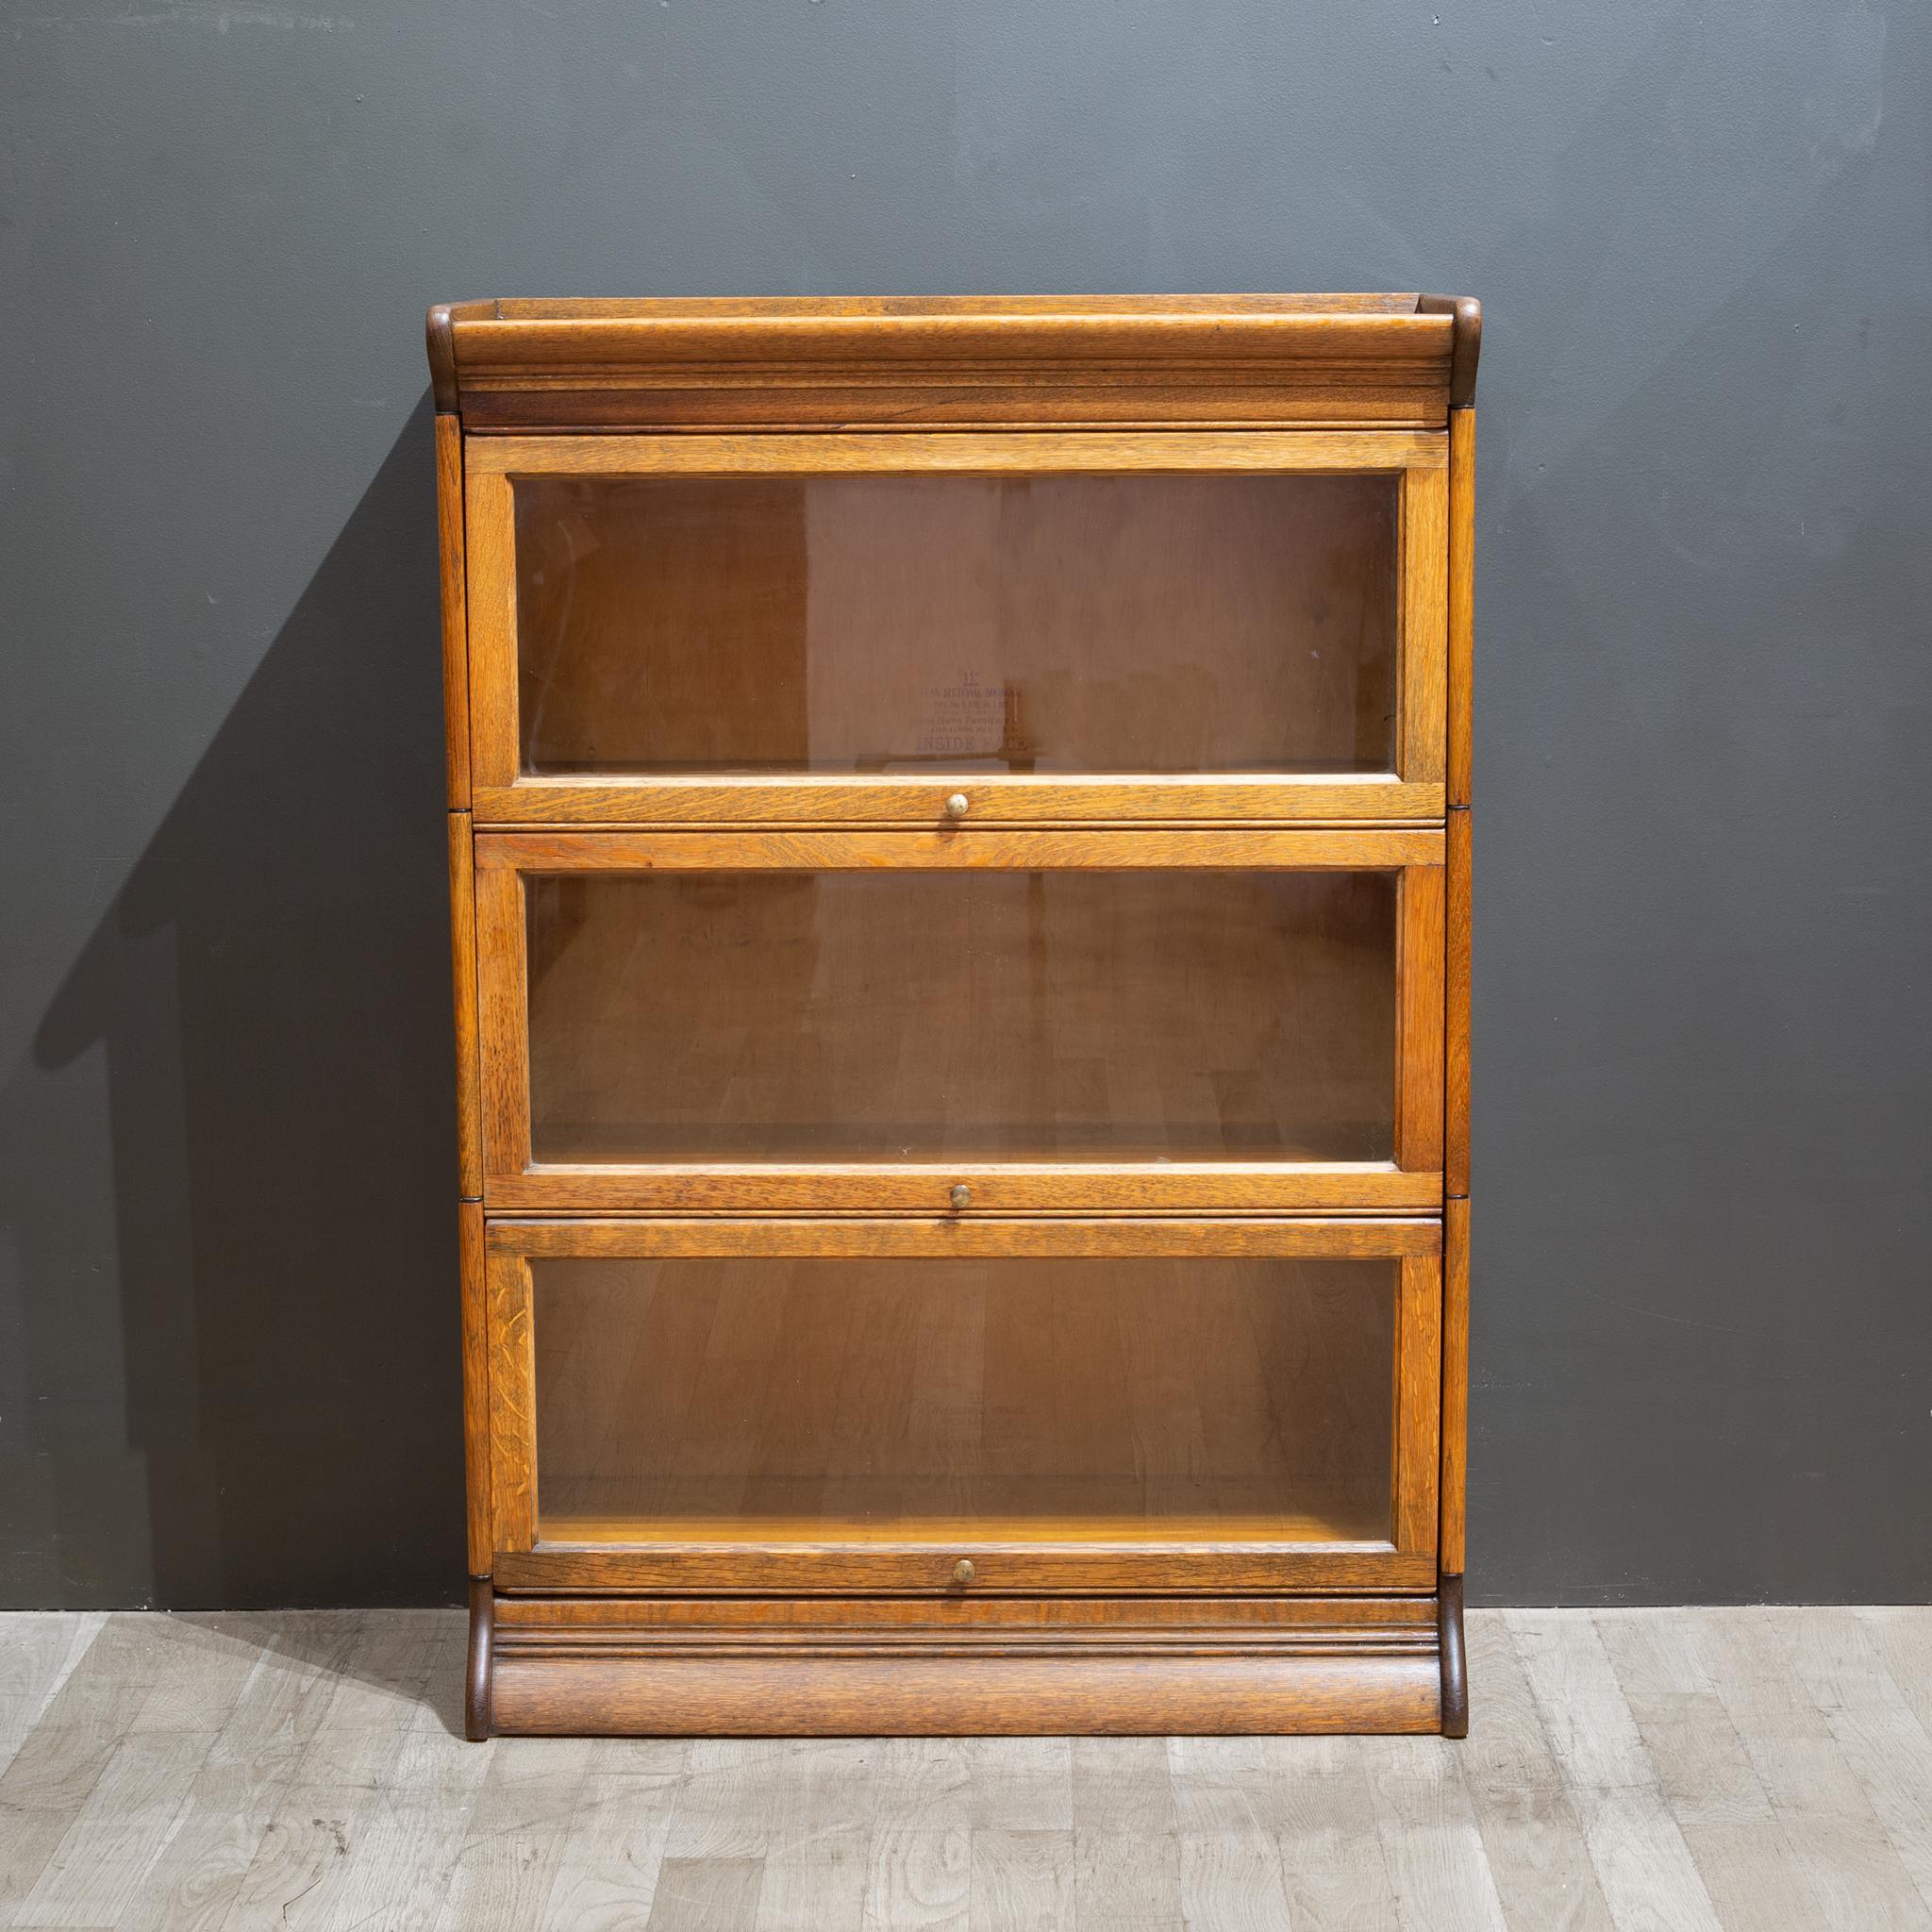 Industrial Late 19th c. Gunn Furniture Co. 3 Stack Lawyer's Bookcase c.1899